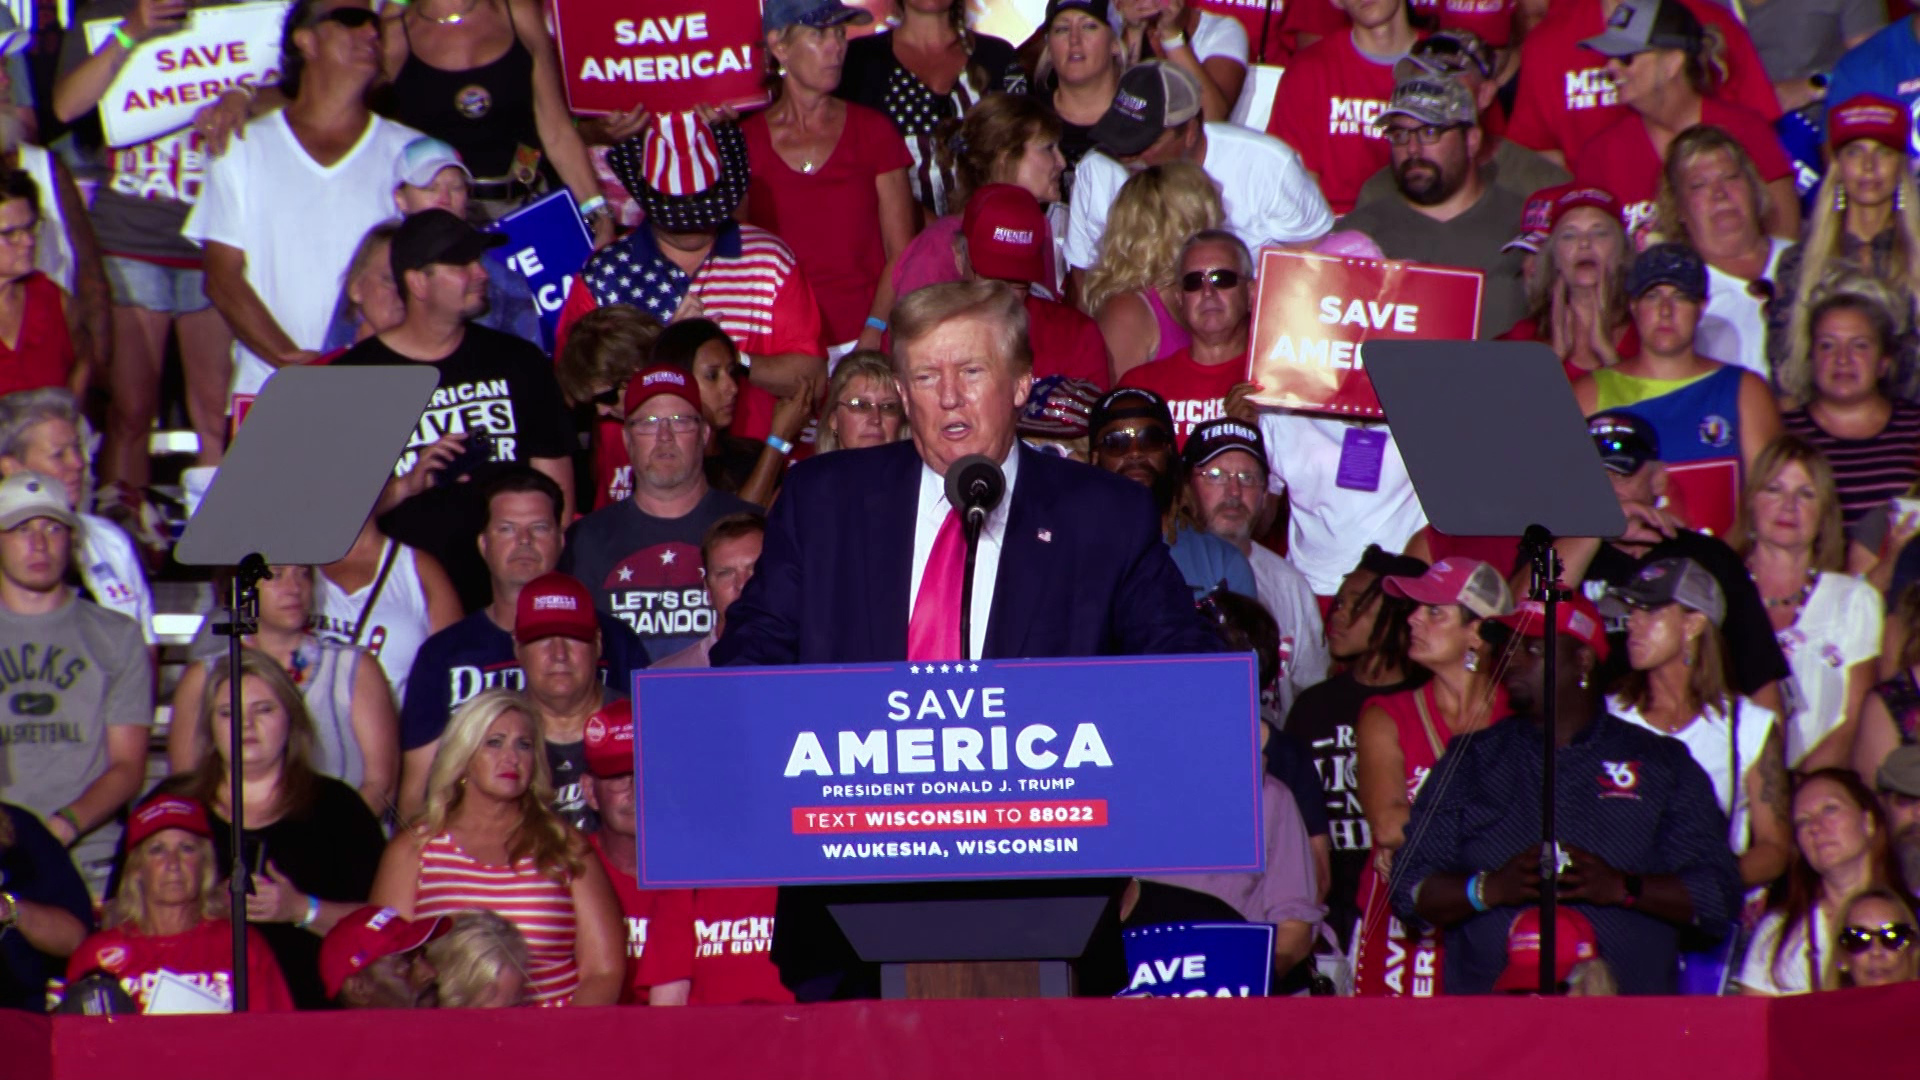 Donald Trump stands behind a podium with a sign reading "Save America" and speaks into a microphone, with teleprompters on either side and an audience of listeners in the background.